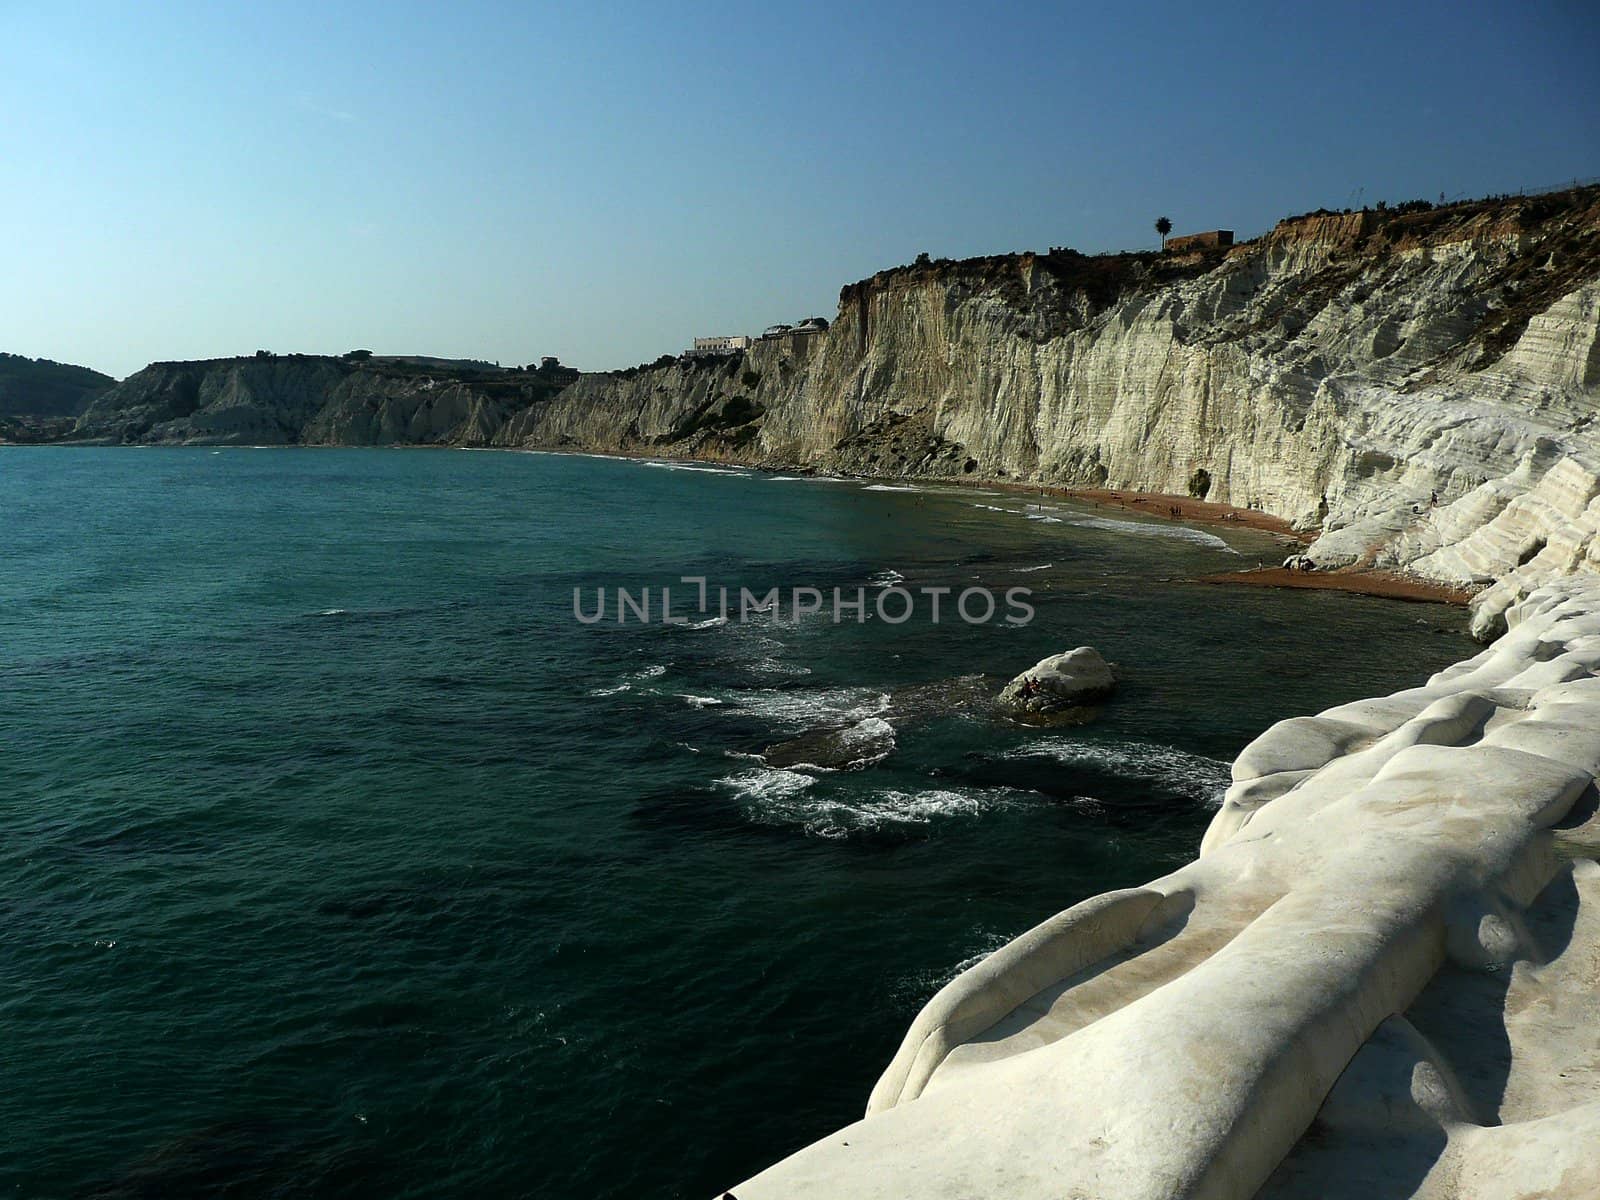 The Rocky White Cliffs named Stair of the Turks, Sicily, Italy by marcorubino